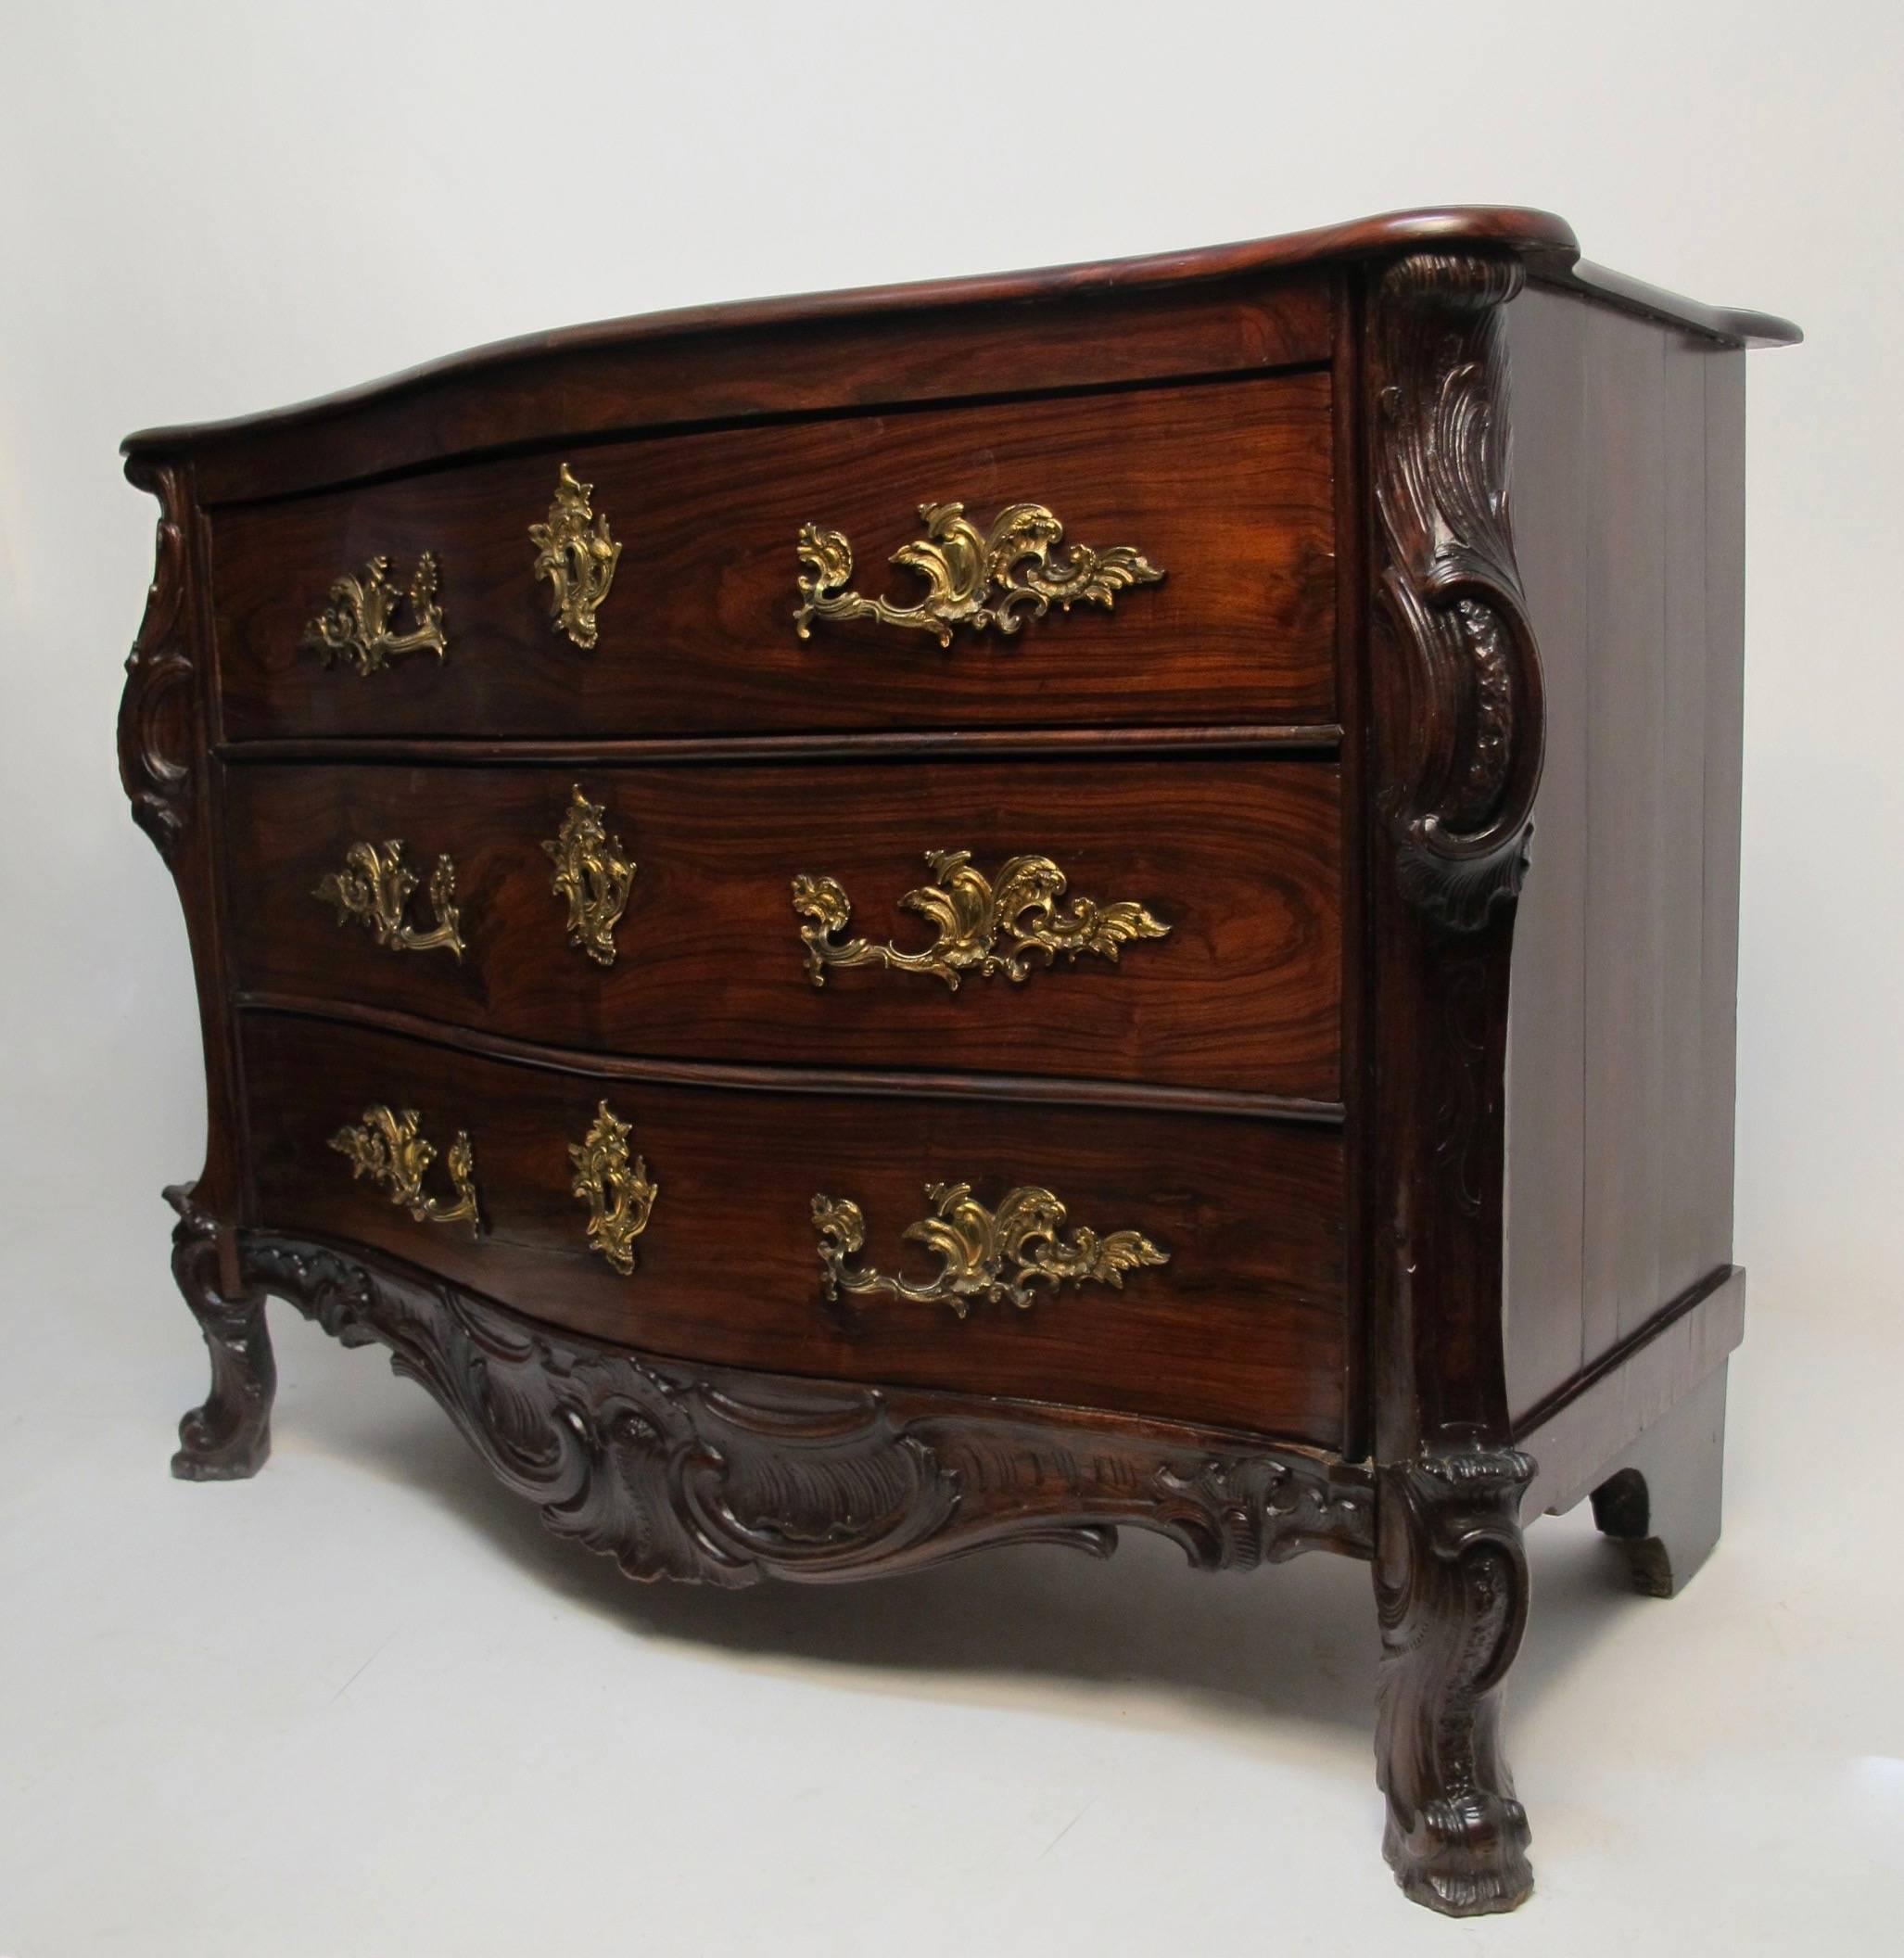 Early 19th Century Portuguese Rosewood Commode, Chest of Drawers In Good Condition For Sale In San Francisco, CA